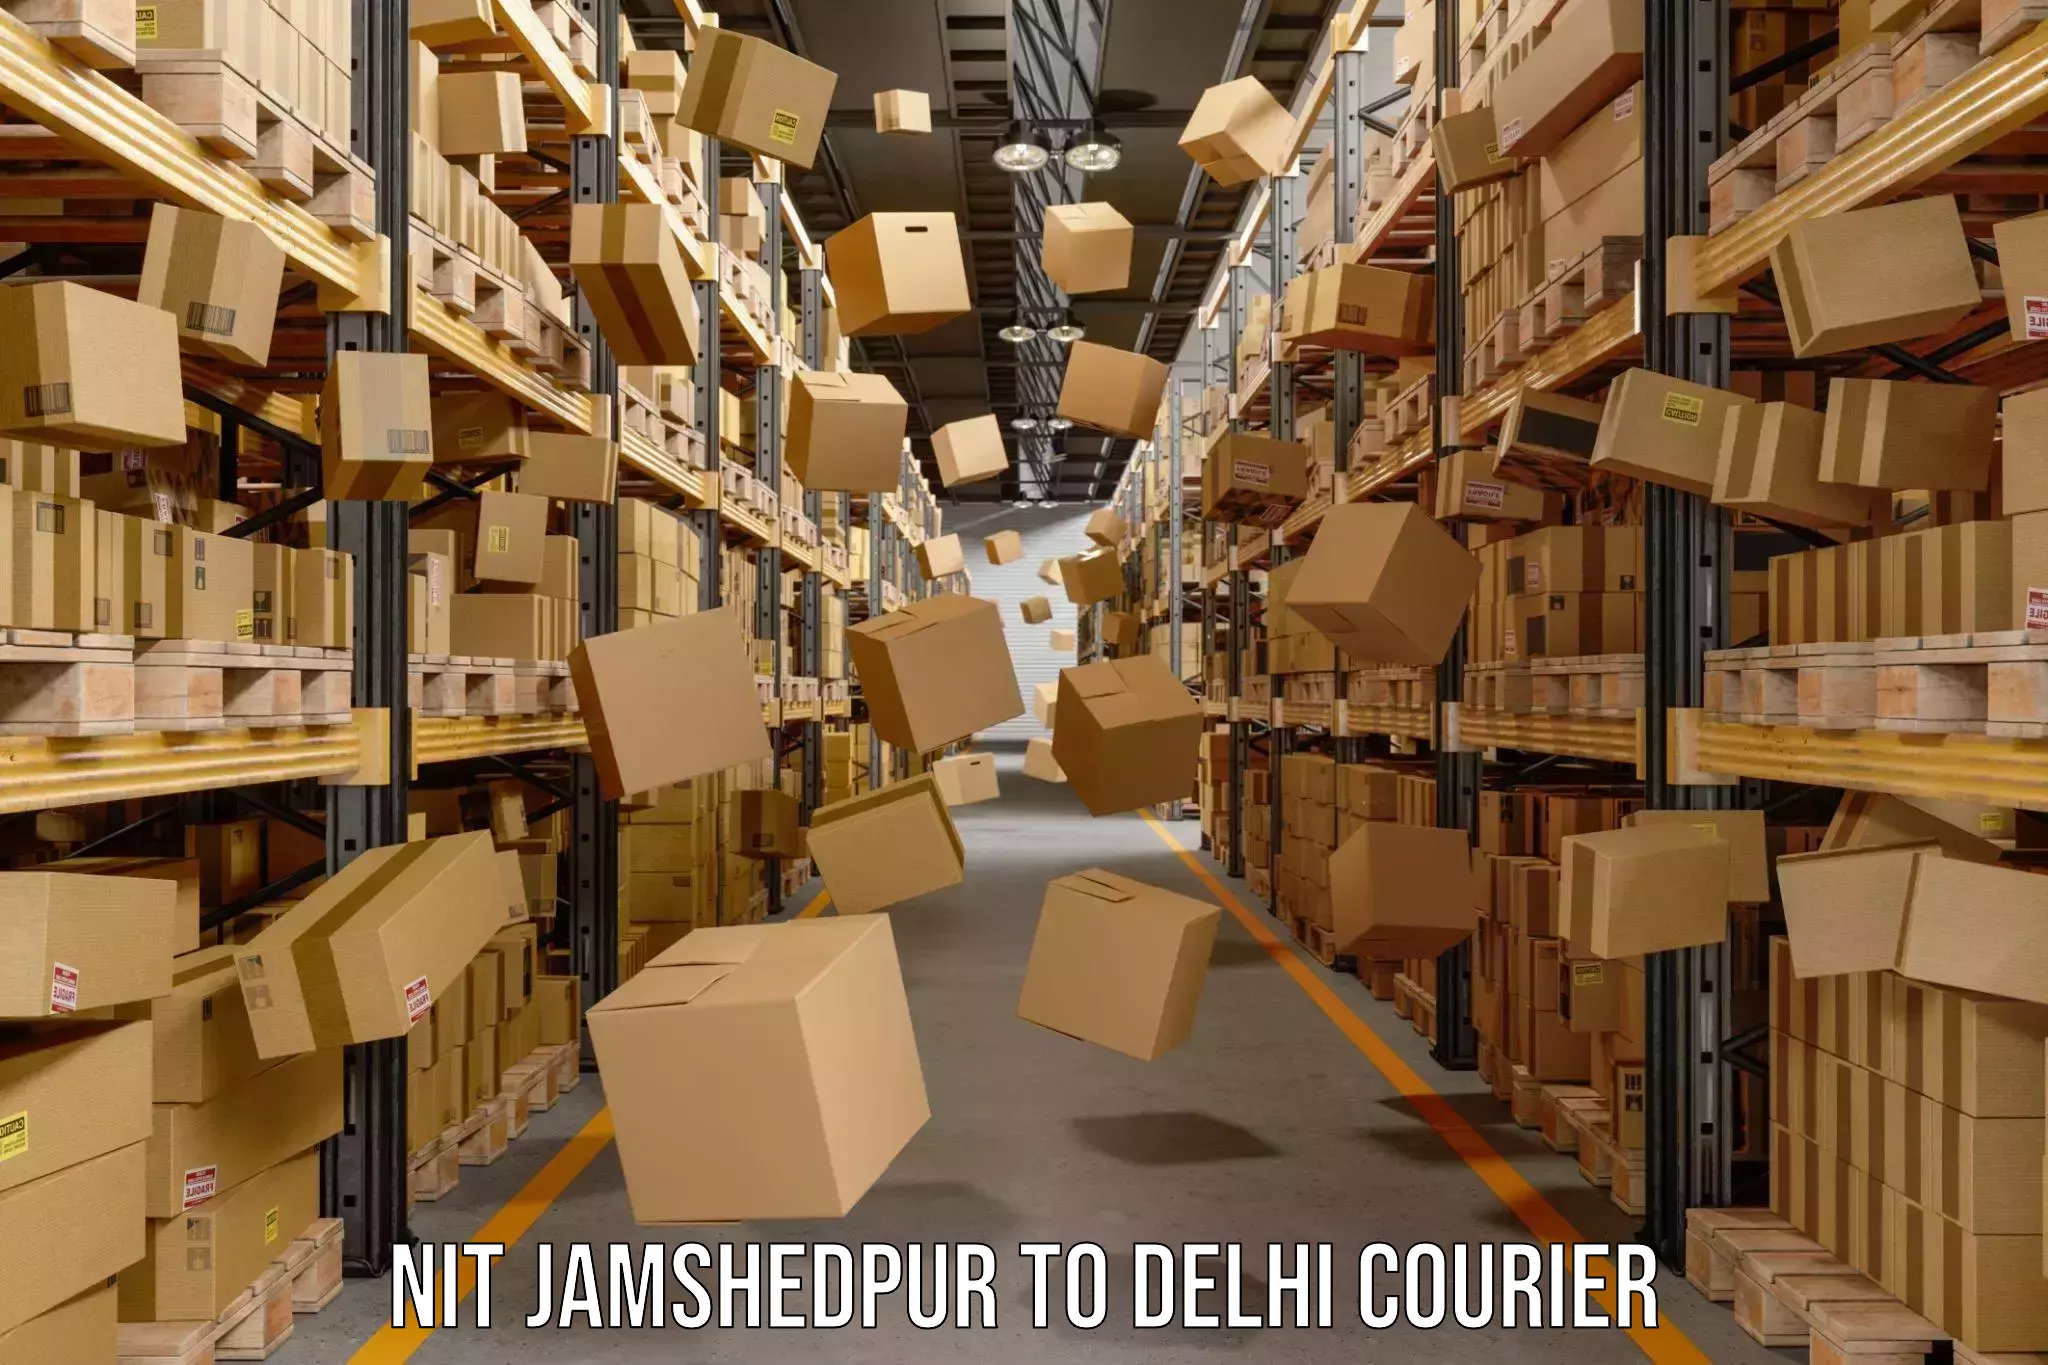 State-of-the-art courier technology NIT Jamshedpur to IIT Delhi